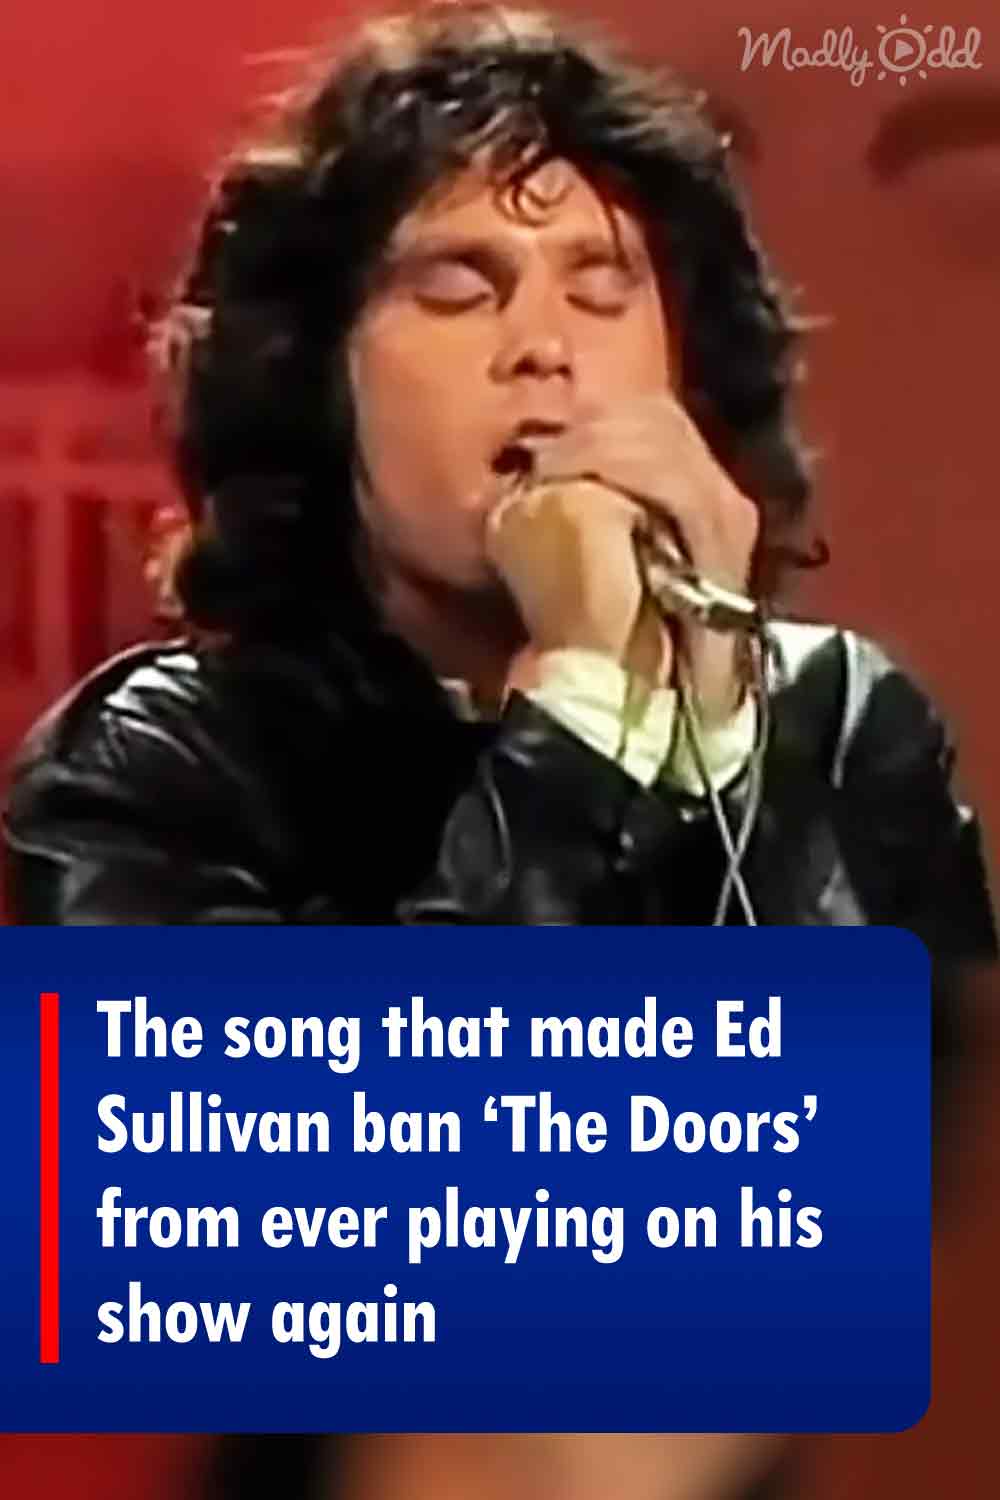 The song that made Ed Sullivan ban ‘The Doors’ from ever playing on his show again